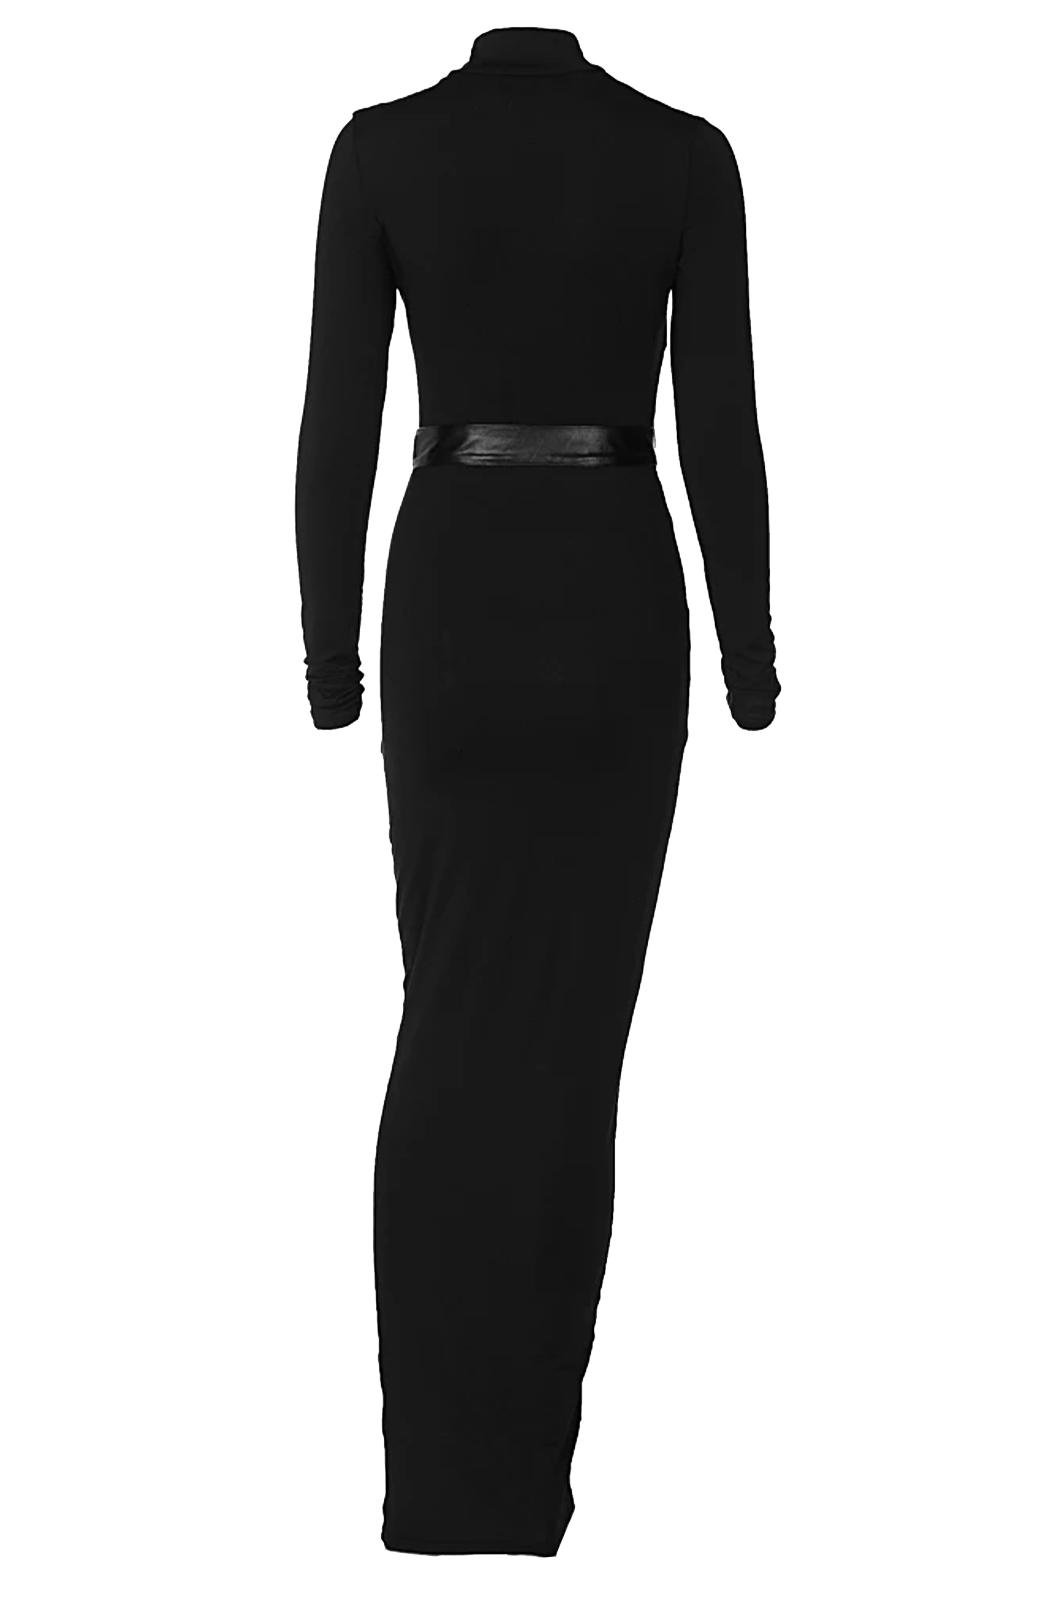 Black maxi dress with leather belt